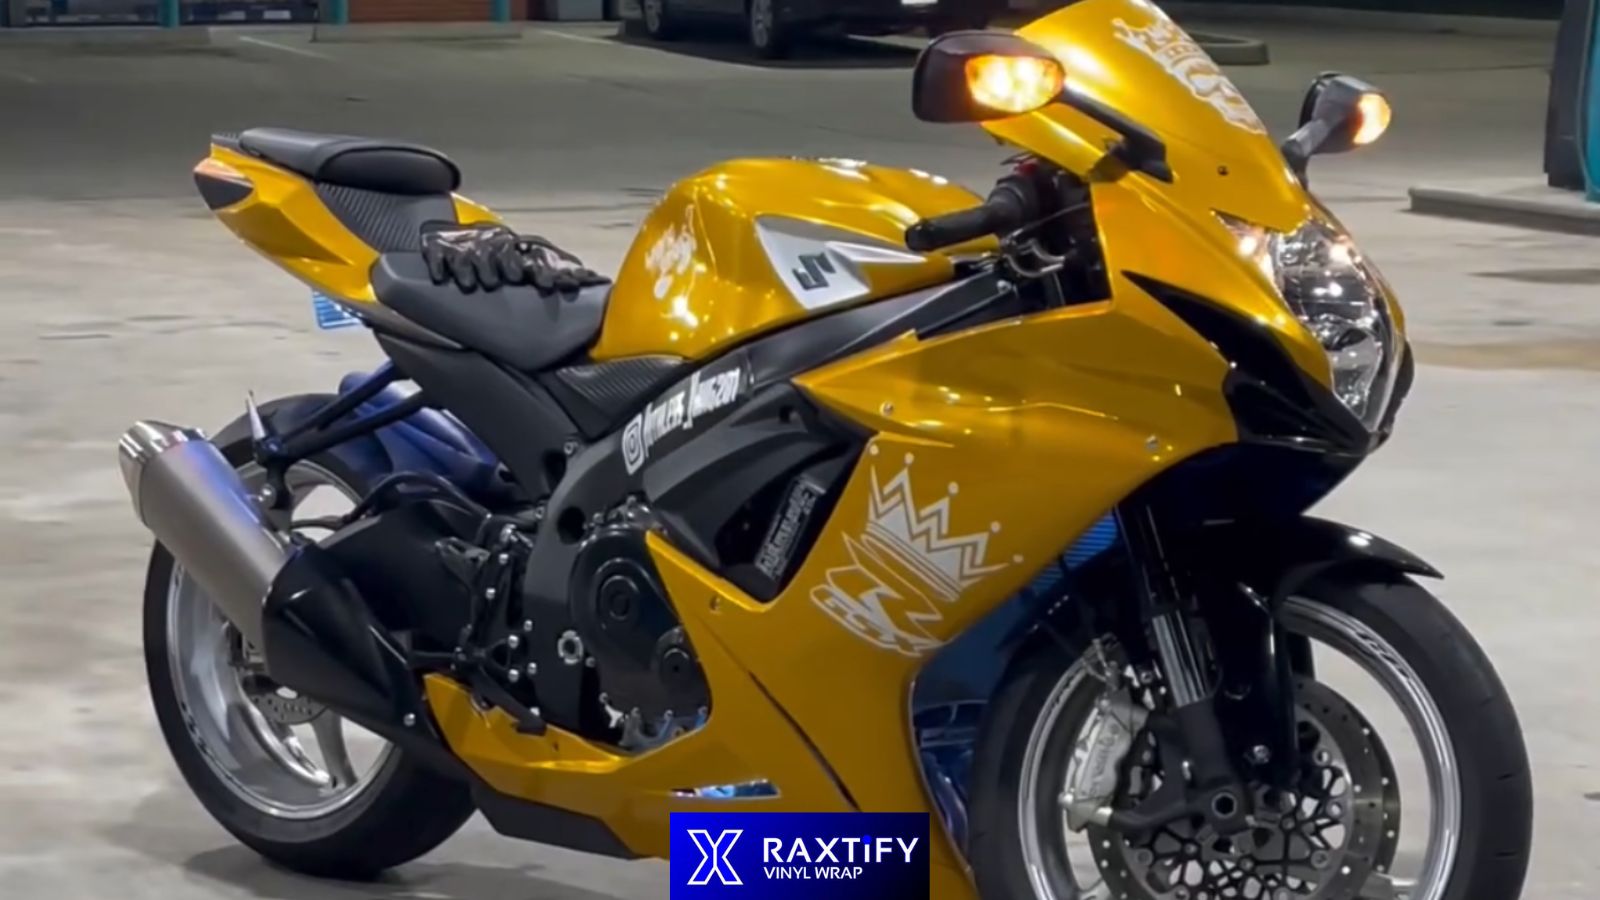 transforming your motorcycle into a head-turning wrap